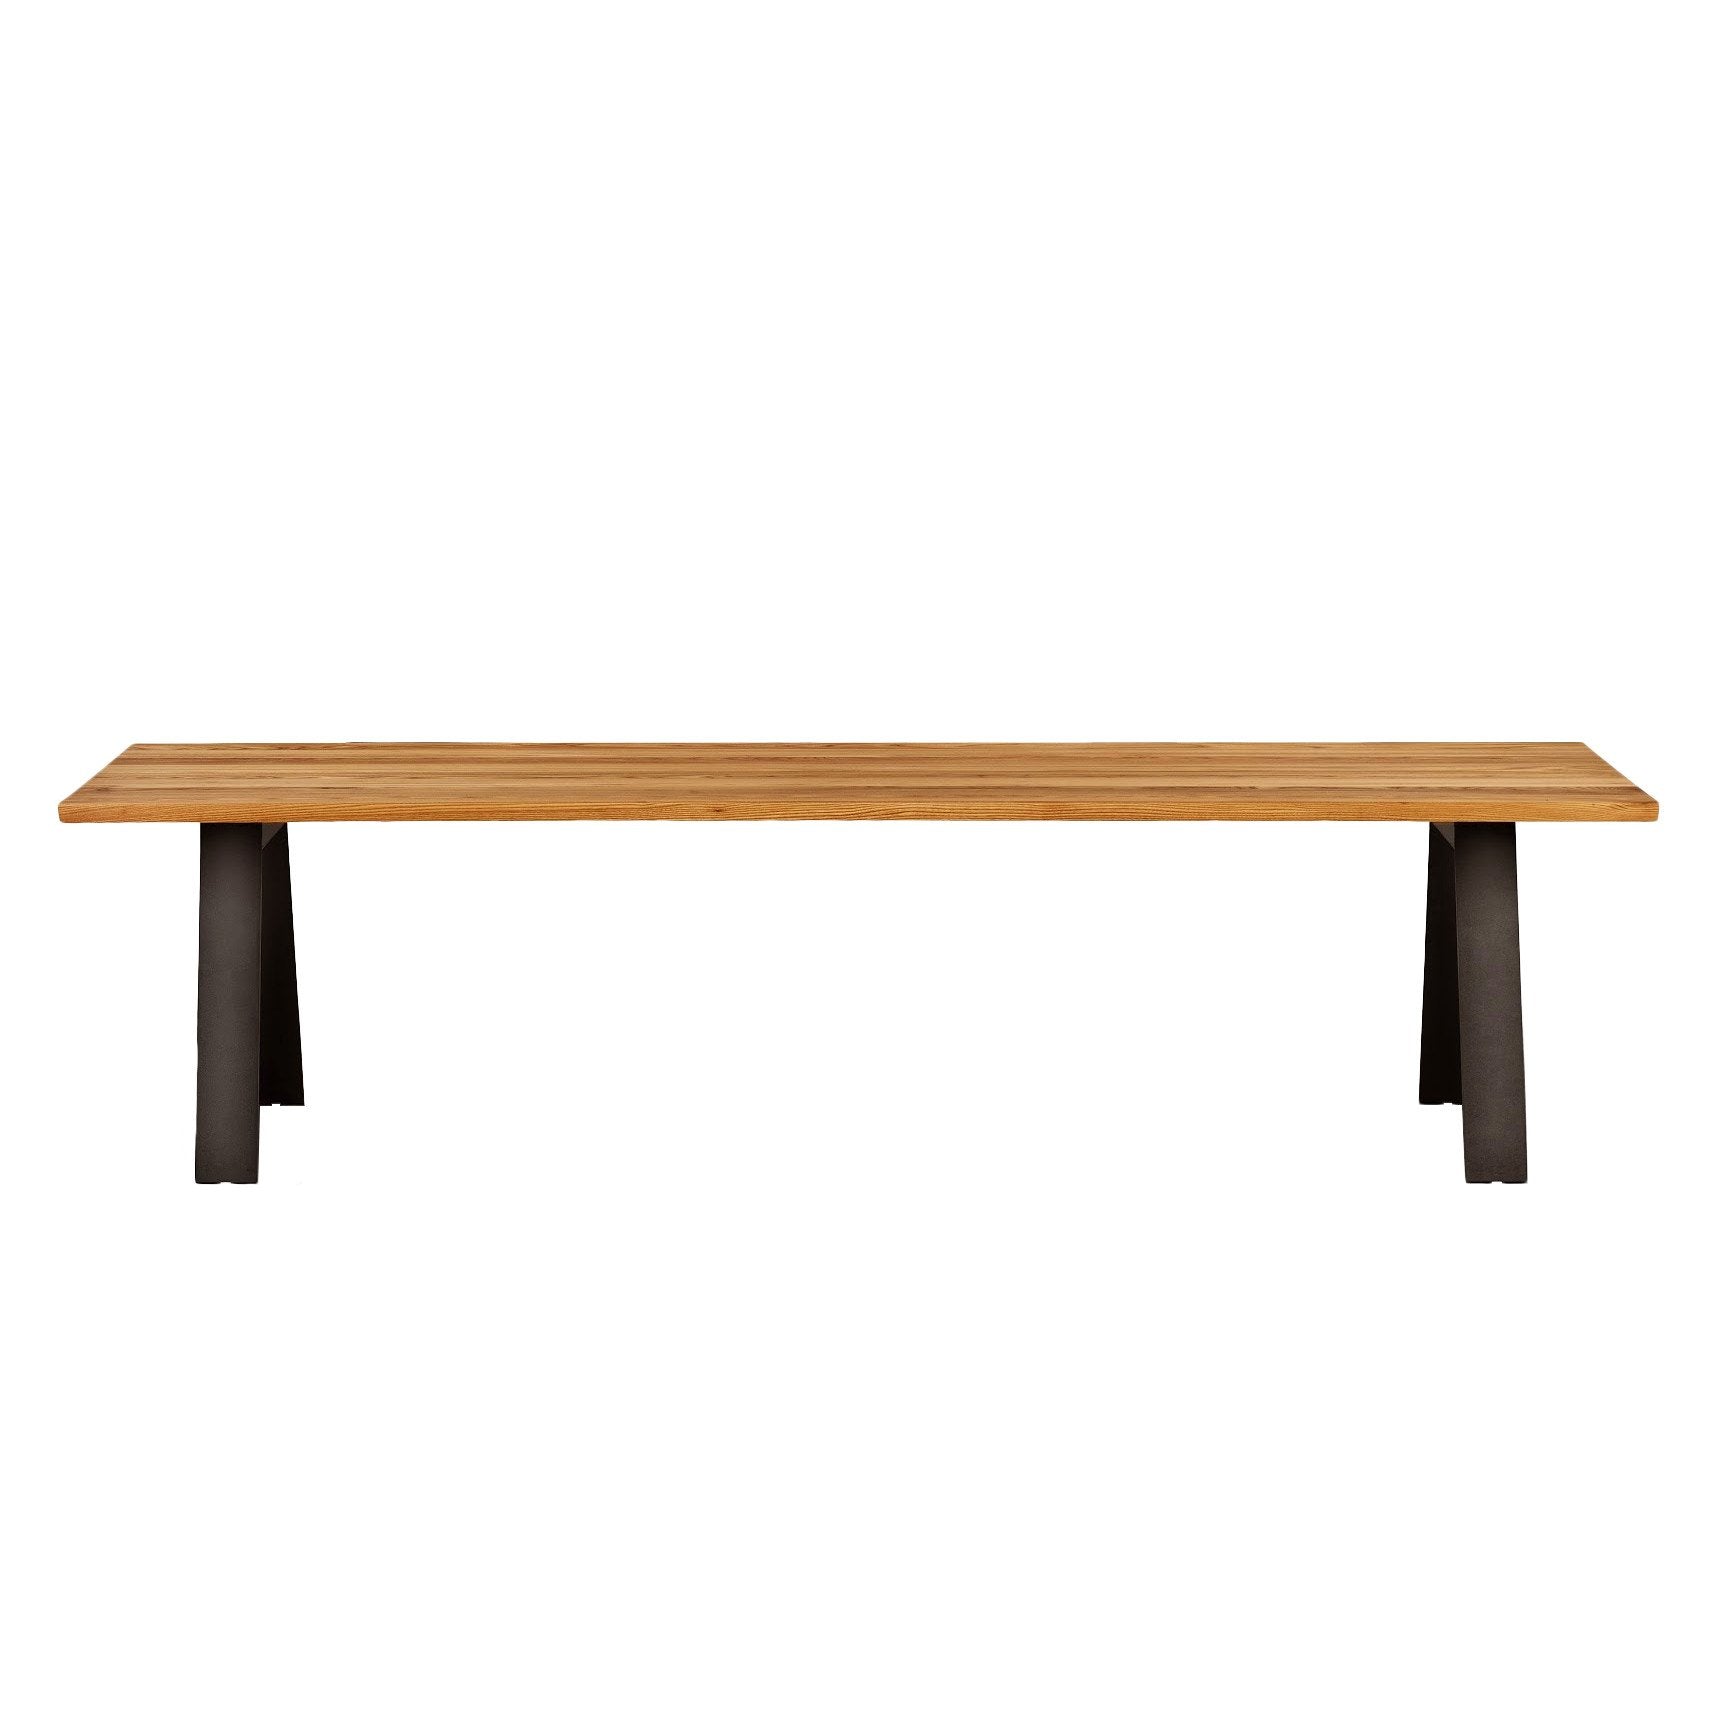 GM3200 Plank Table